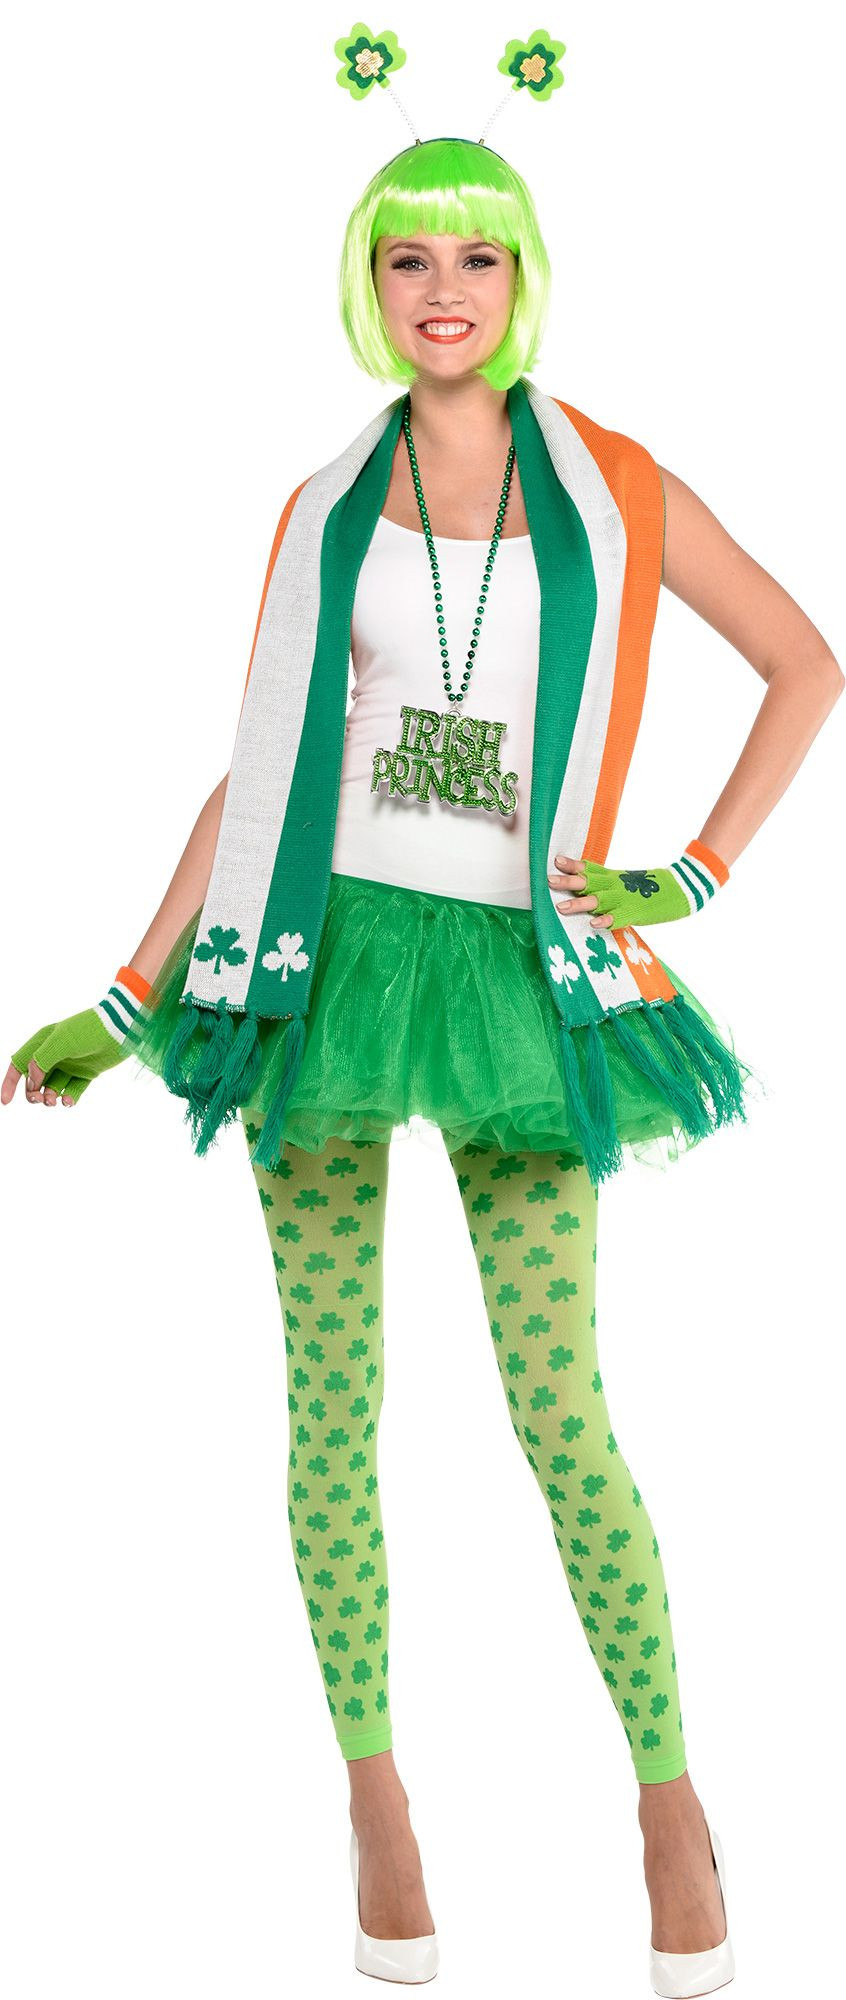 Party City St Patrick's Day Costumes
 Women s Sassy St Patrick s Day Wearables Party City